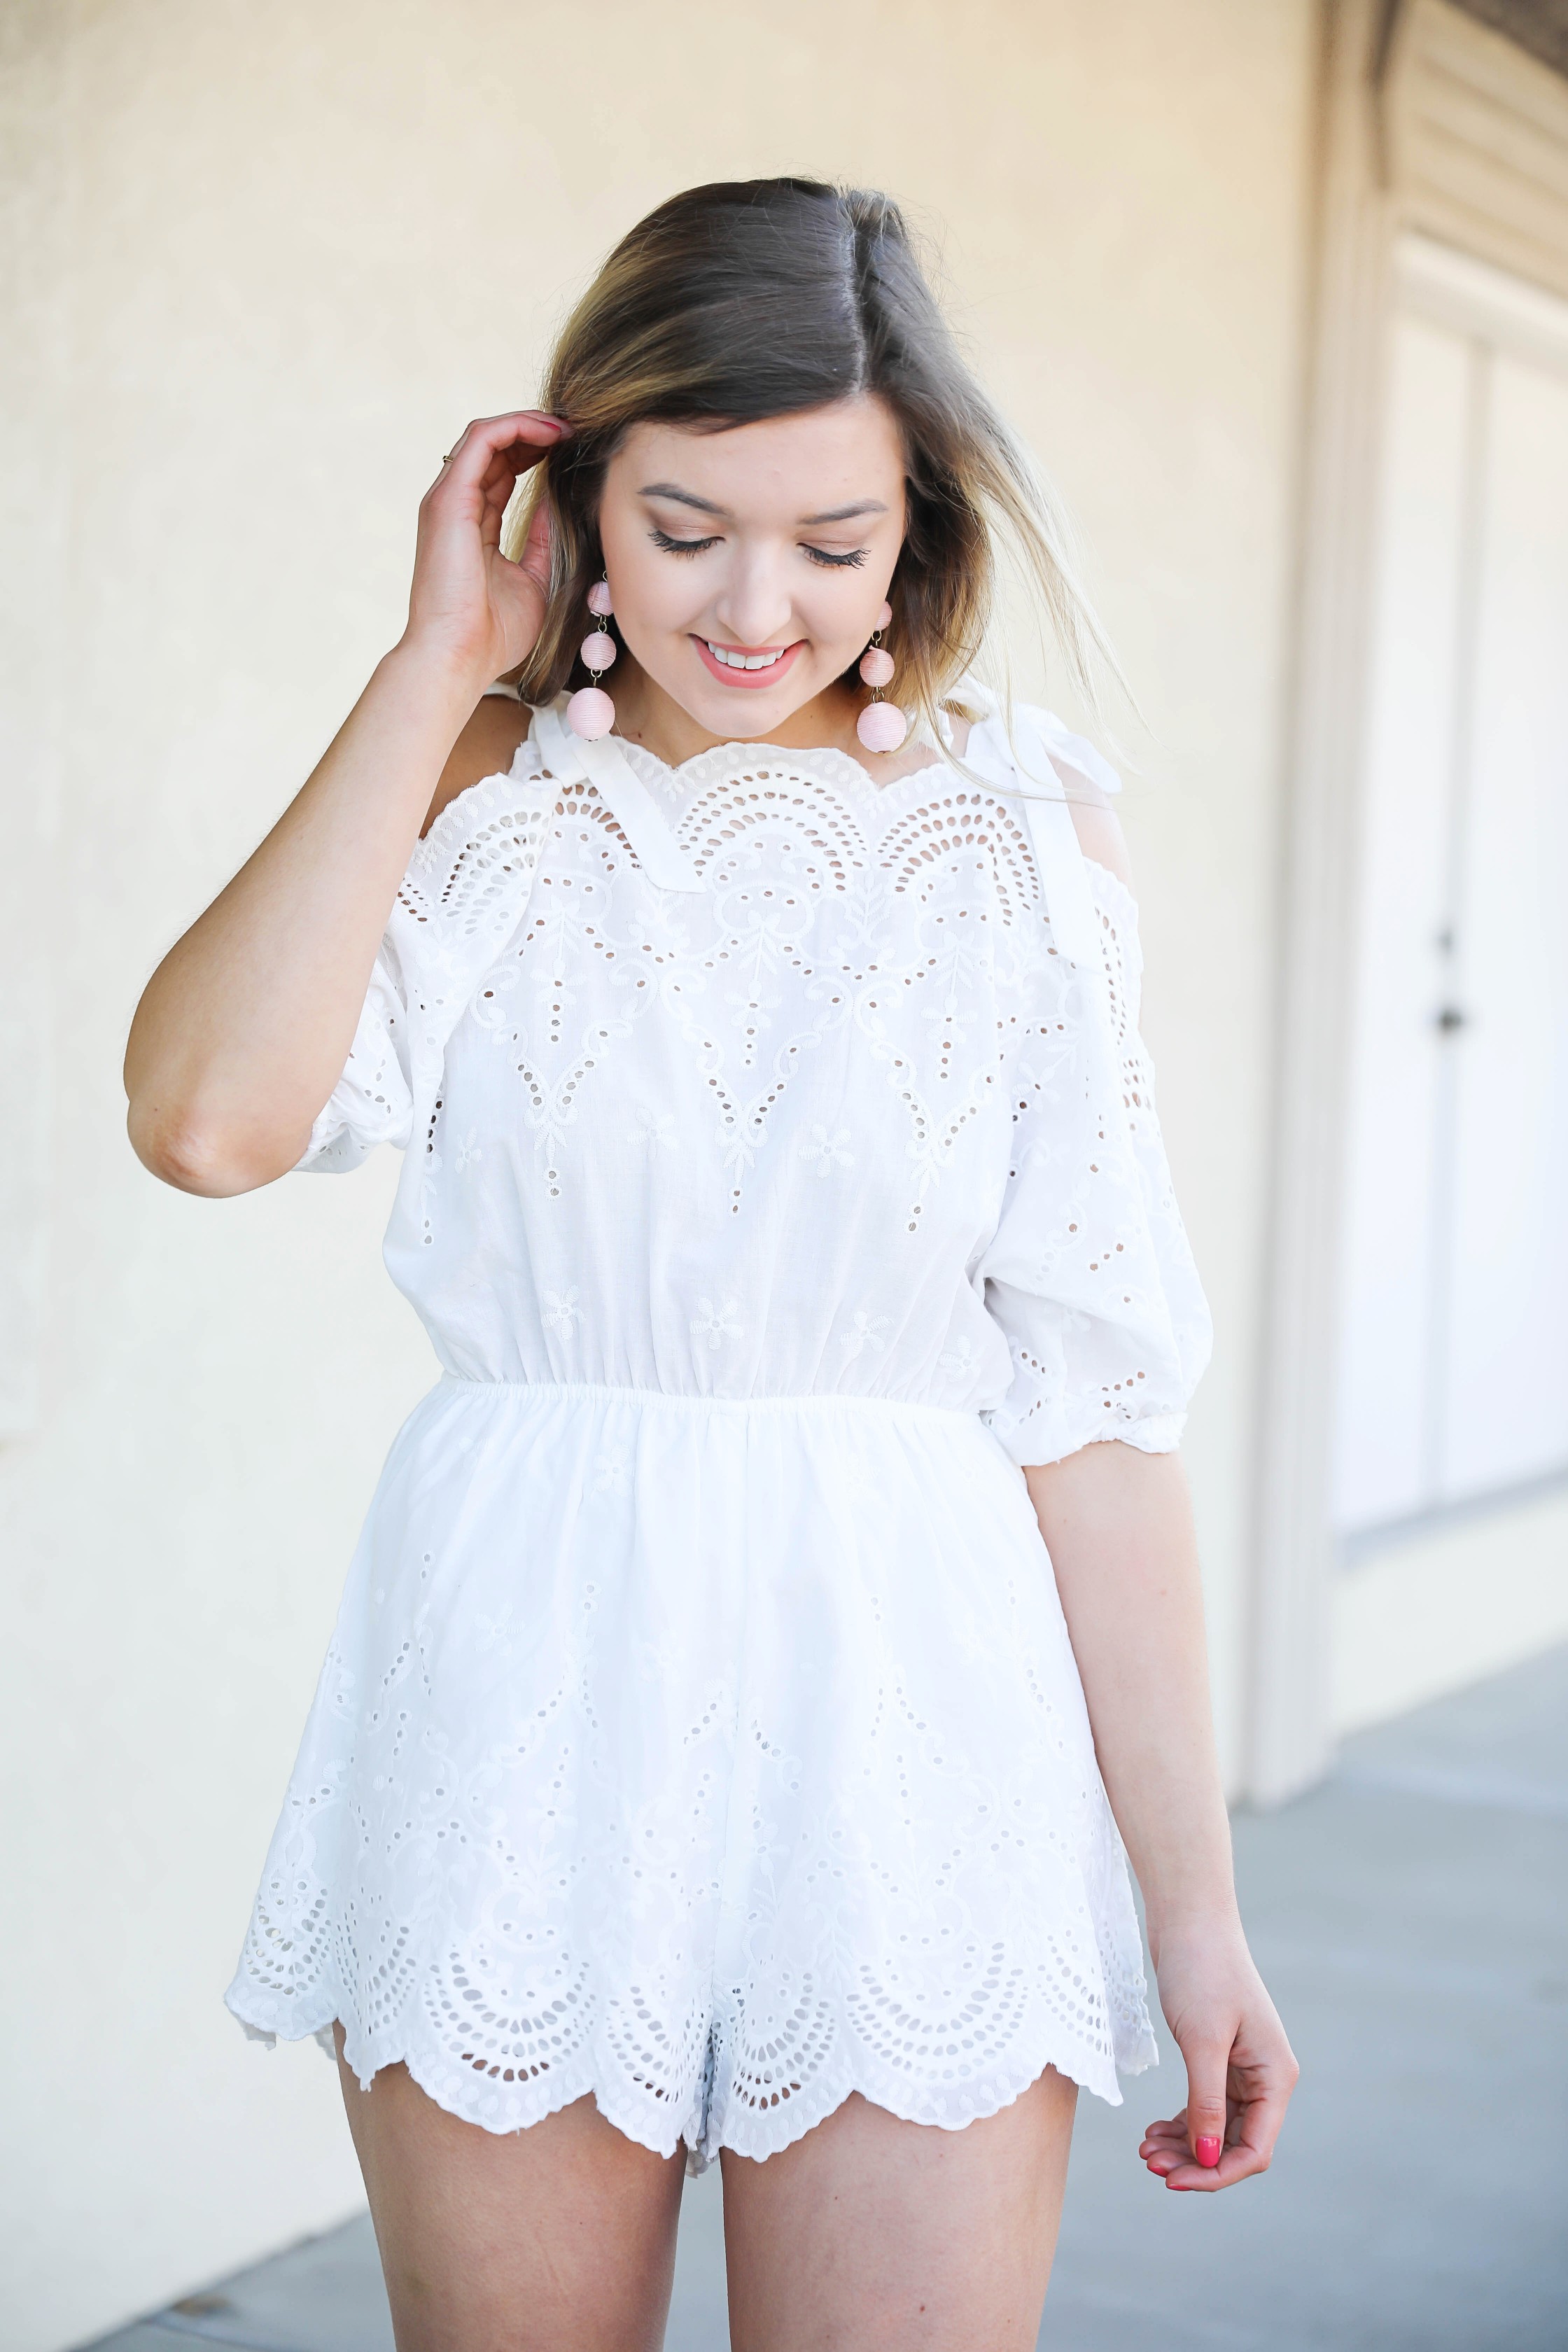 Scalloped romper from Hello Molly! Perfect outfit for valentine's day! Cute white romper for spring or summer! Get the details on daily dose of charm by lauren lindmark